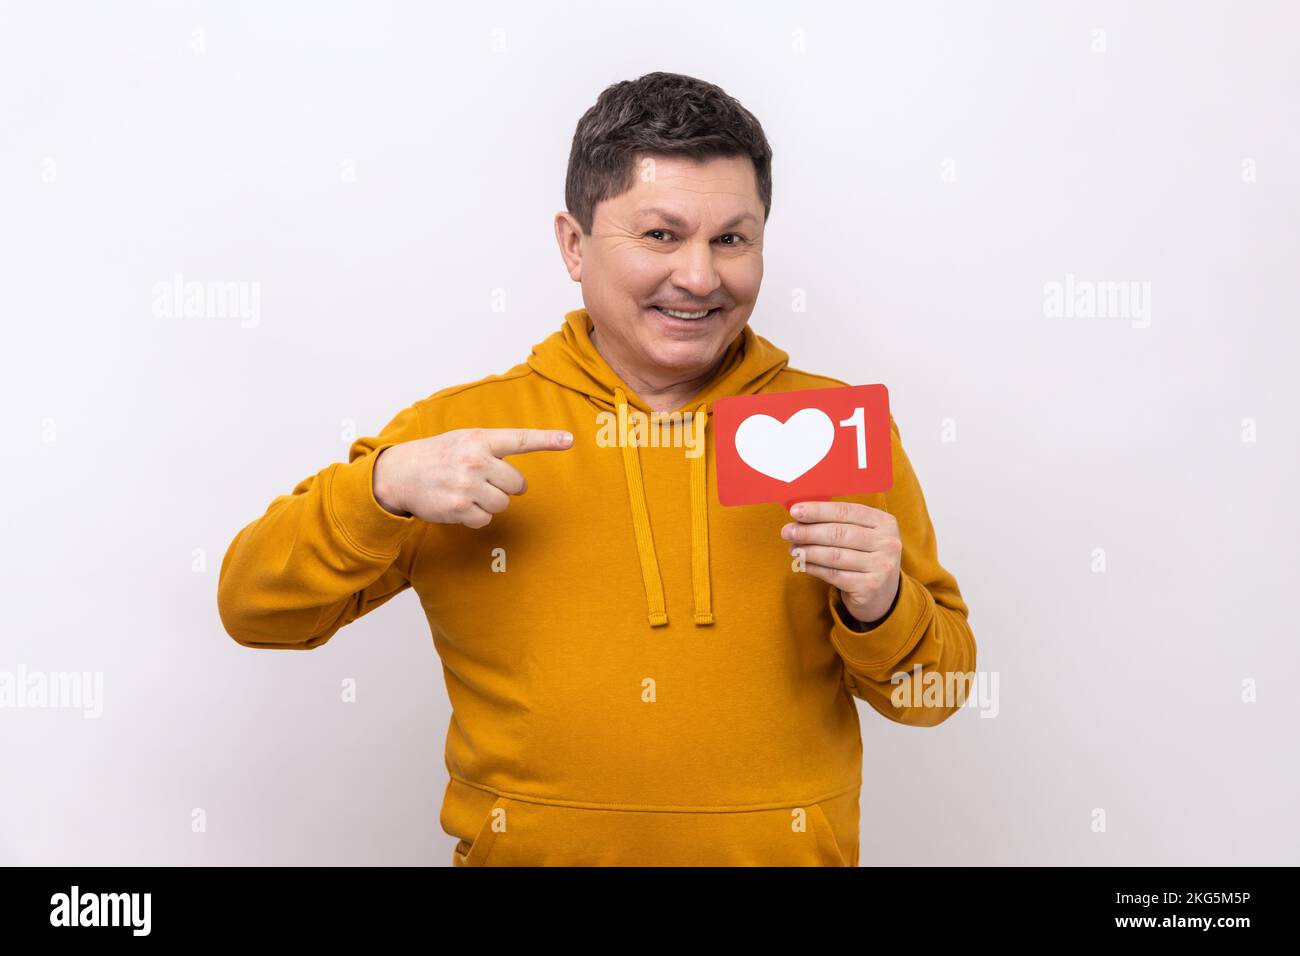 Internet blogging. Portrait of joyful man pointing at heart like icon, recommending to click on social media button, wearing urban style hoodie. Indoor studio shot isolated on white background. Stock Photo